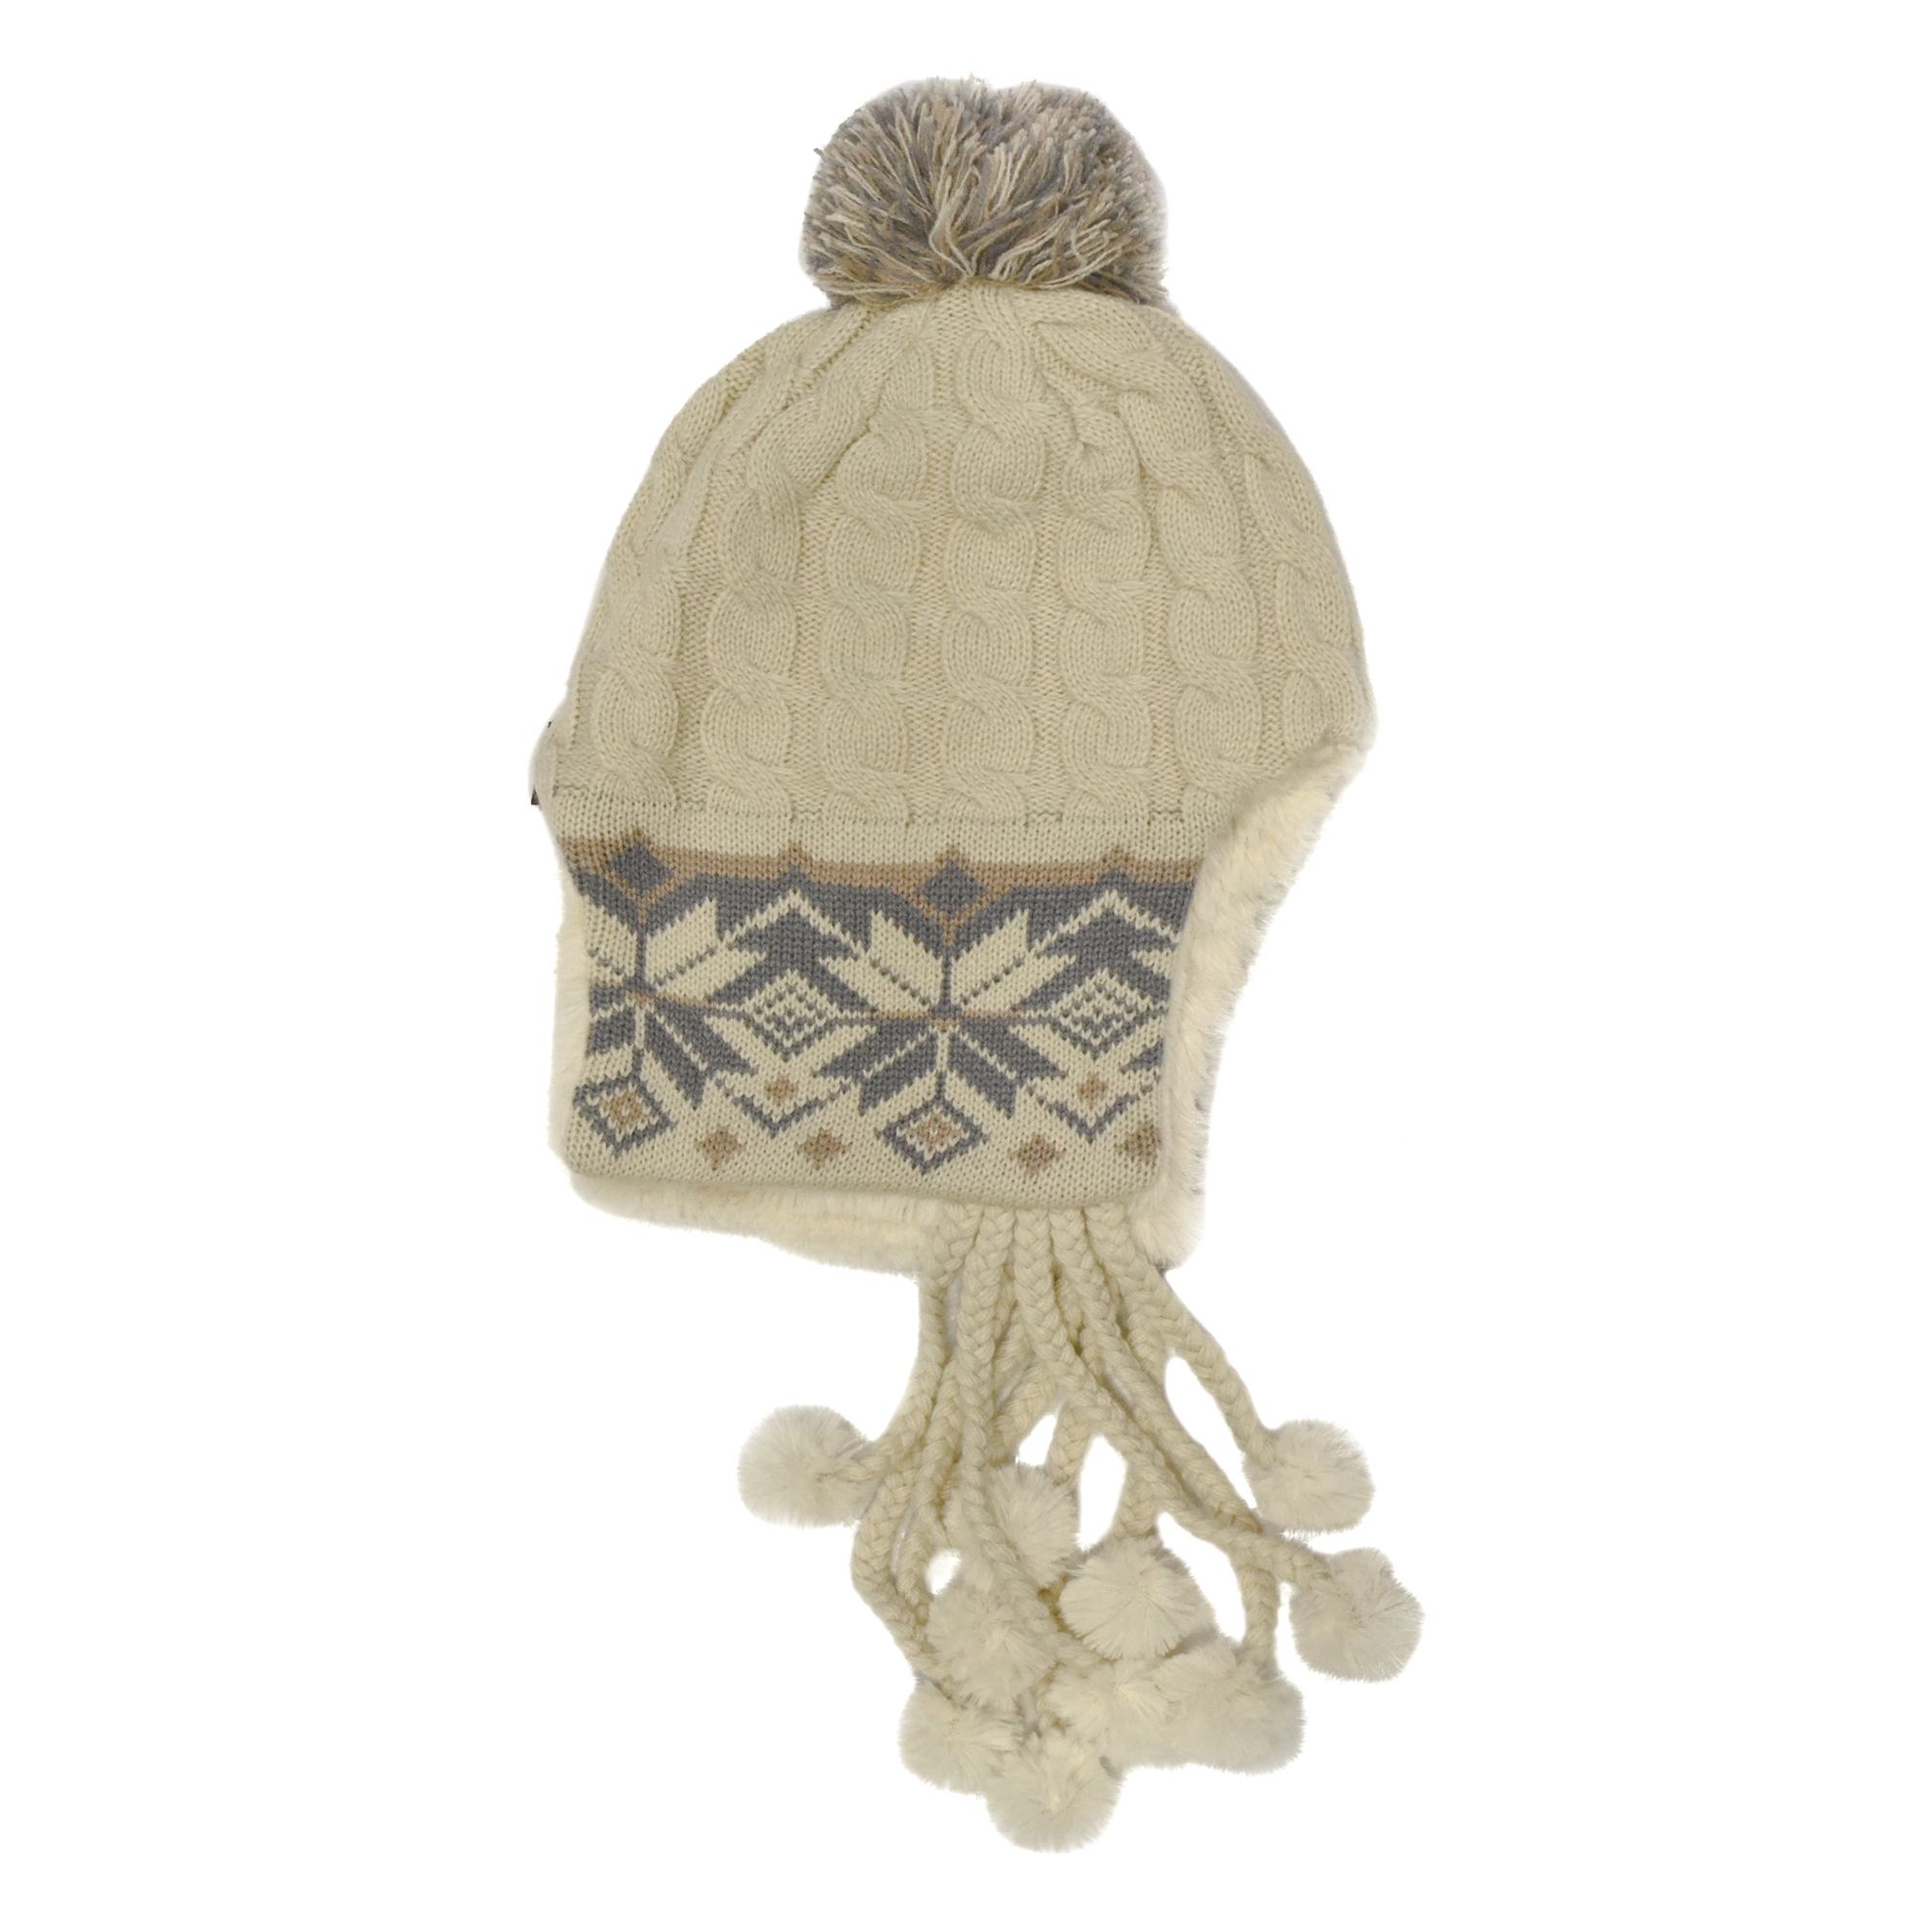 Snowflake Trim Cable Helmet with Multiple Poms - Winter White